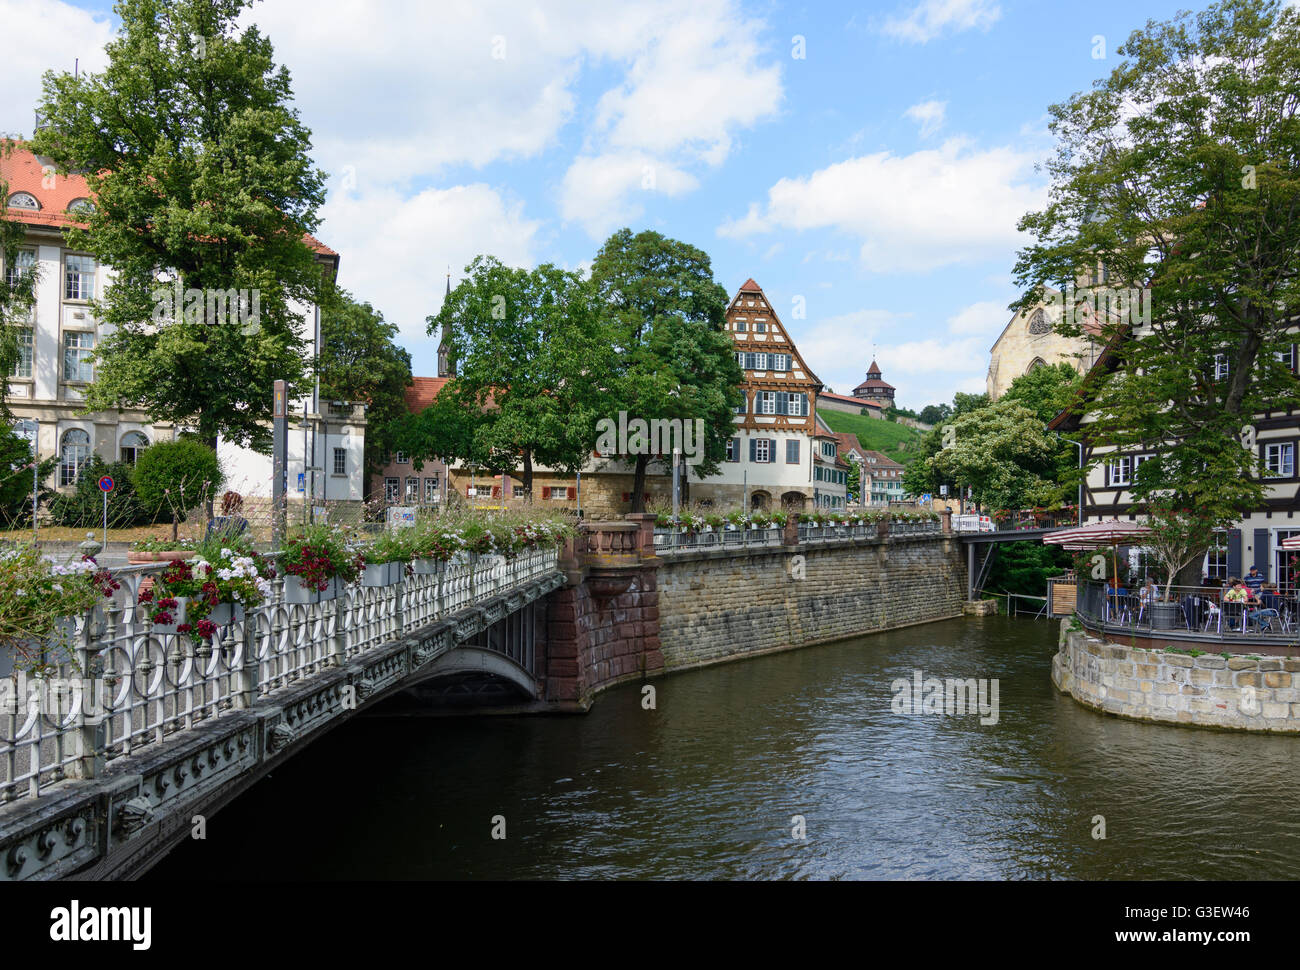 stream Rossneckar with the old carpentry and the City Church St. Dionys, Germany, Baden-Württemberg, Region Stuttgart, Esslingen Stock Photo